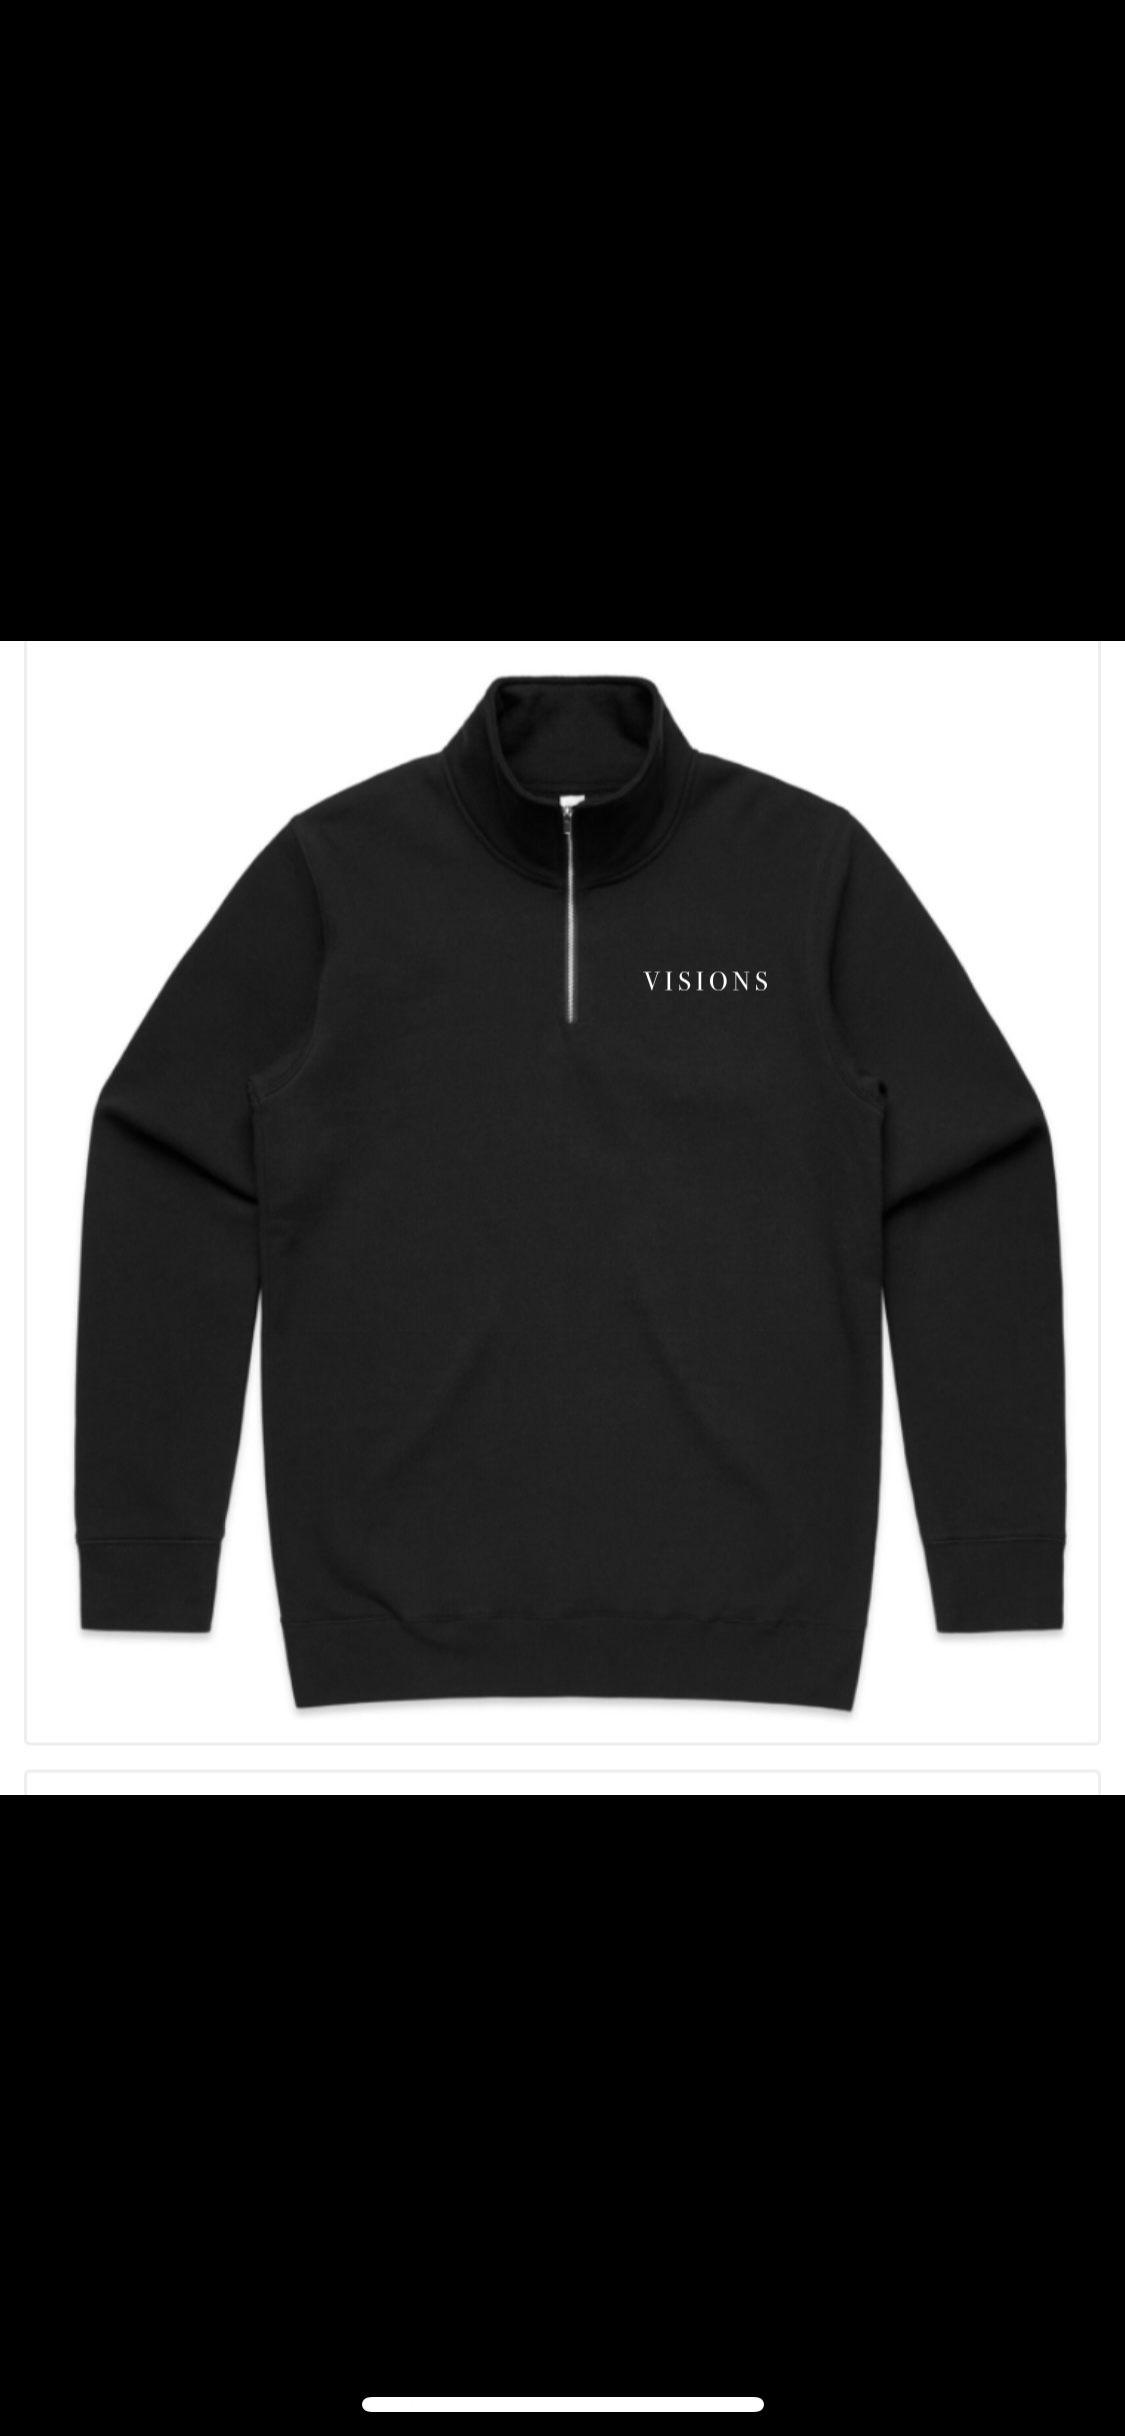 Image of VISIONS “Luxury is Simplicity” Quarter Zip Jacket (White Stitch) 